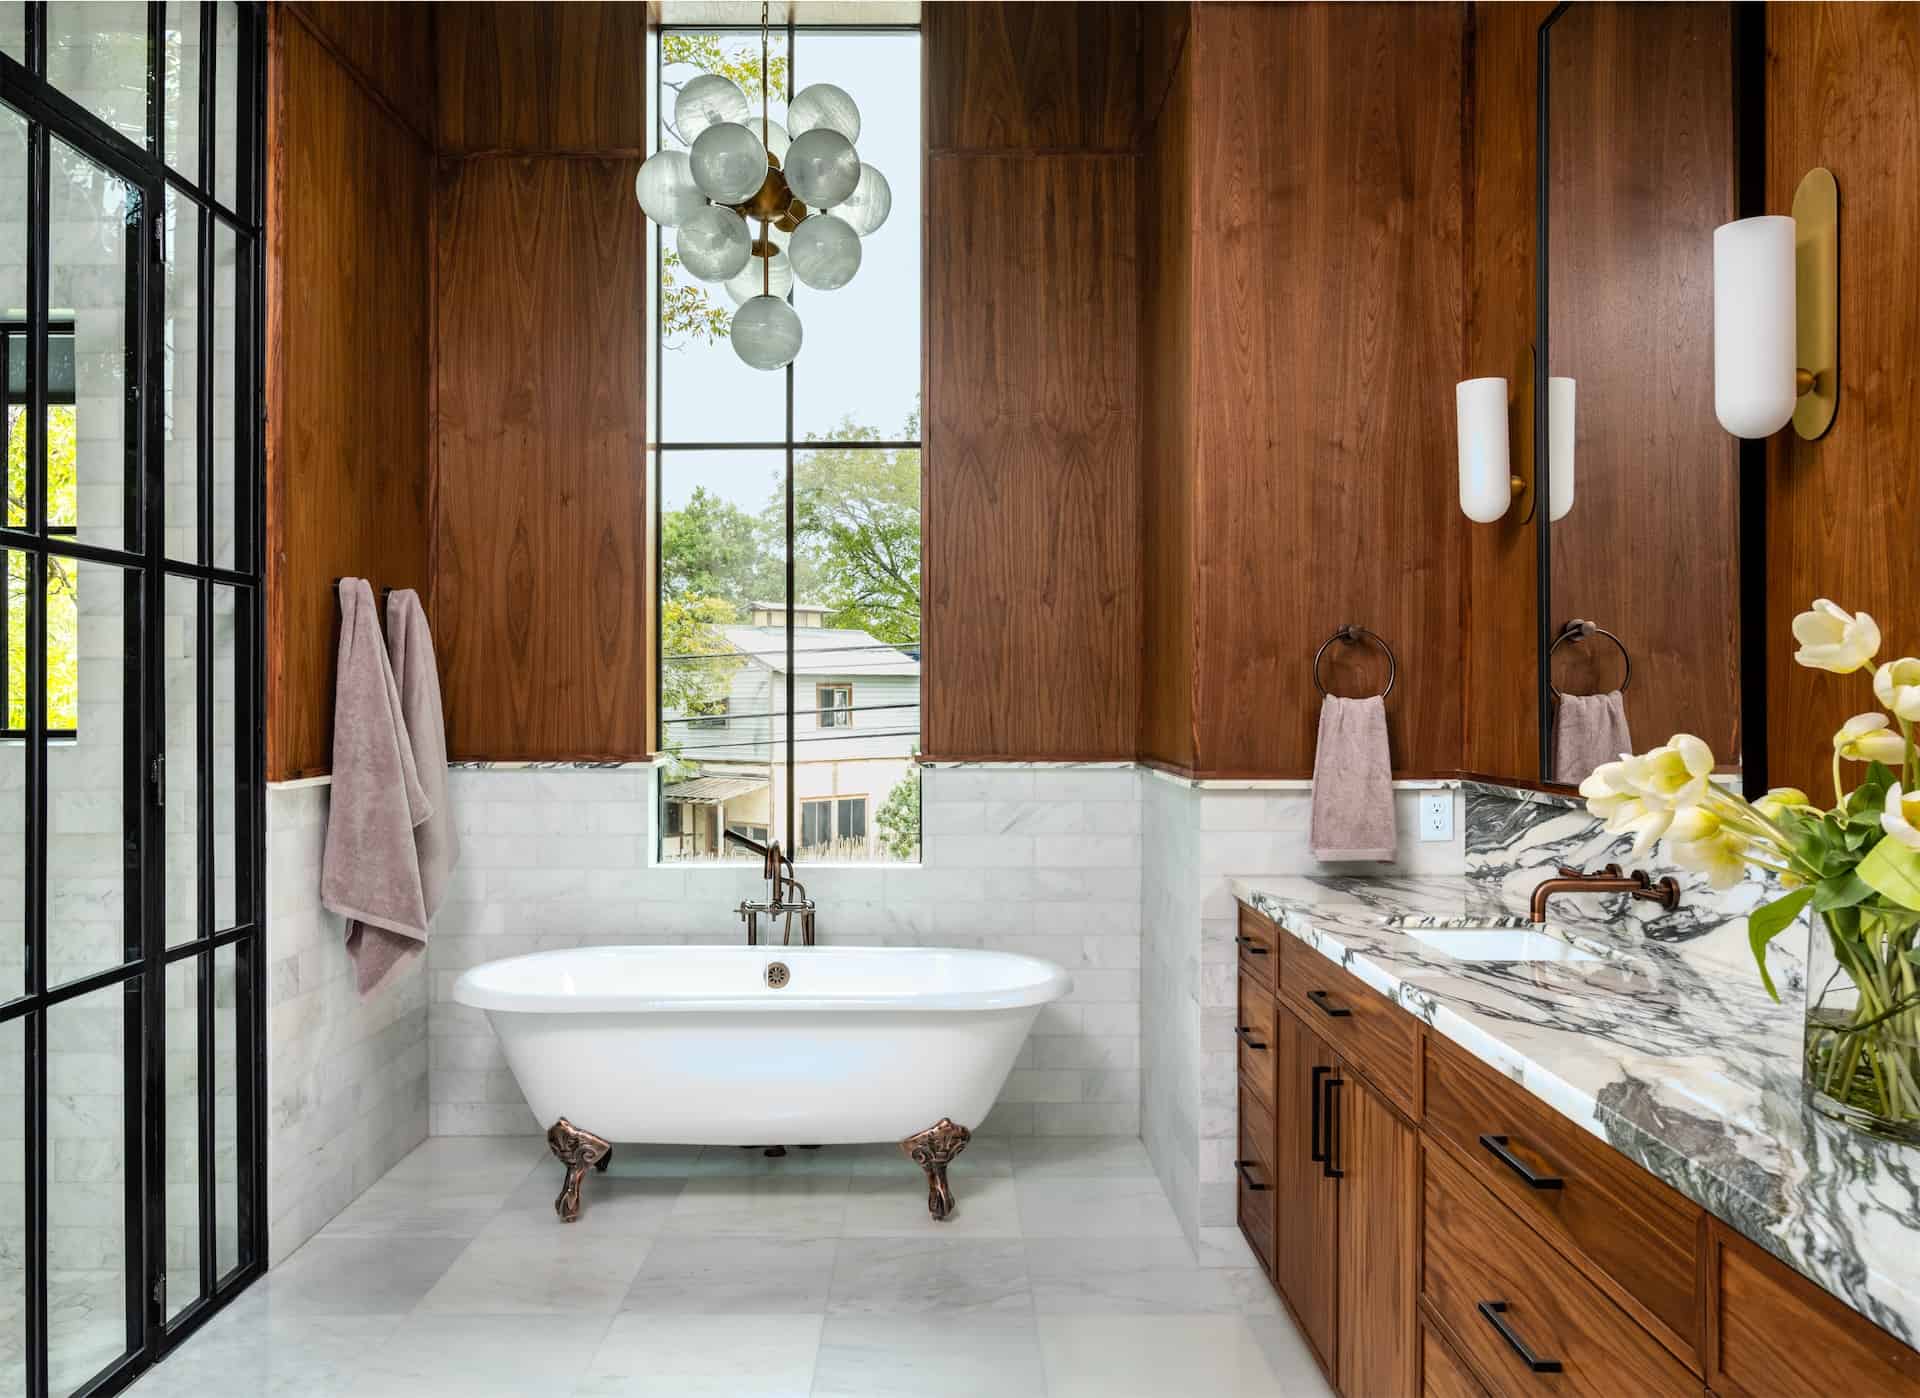 A bathroom with wood paneling and elegant marble counter tops is a luxurious feature of this real estate property.